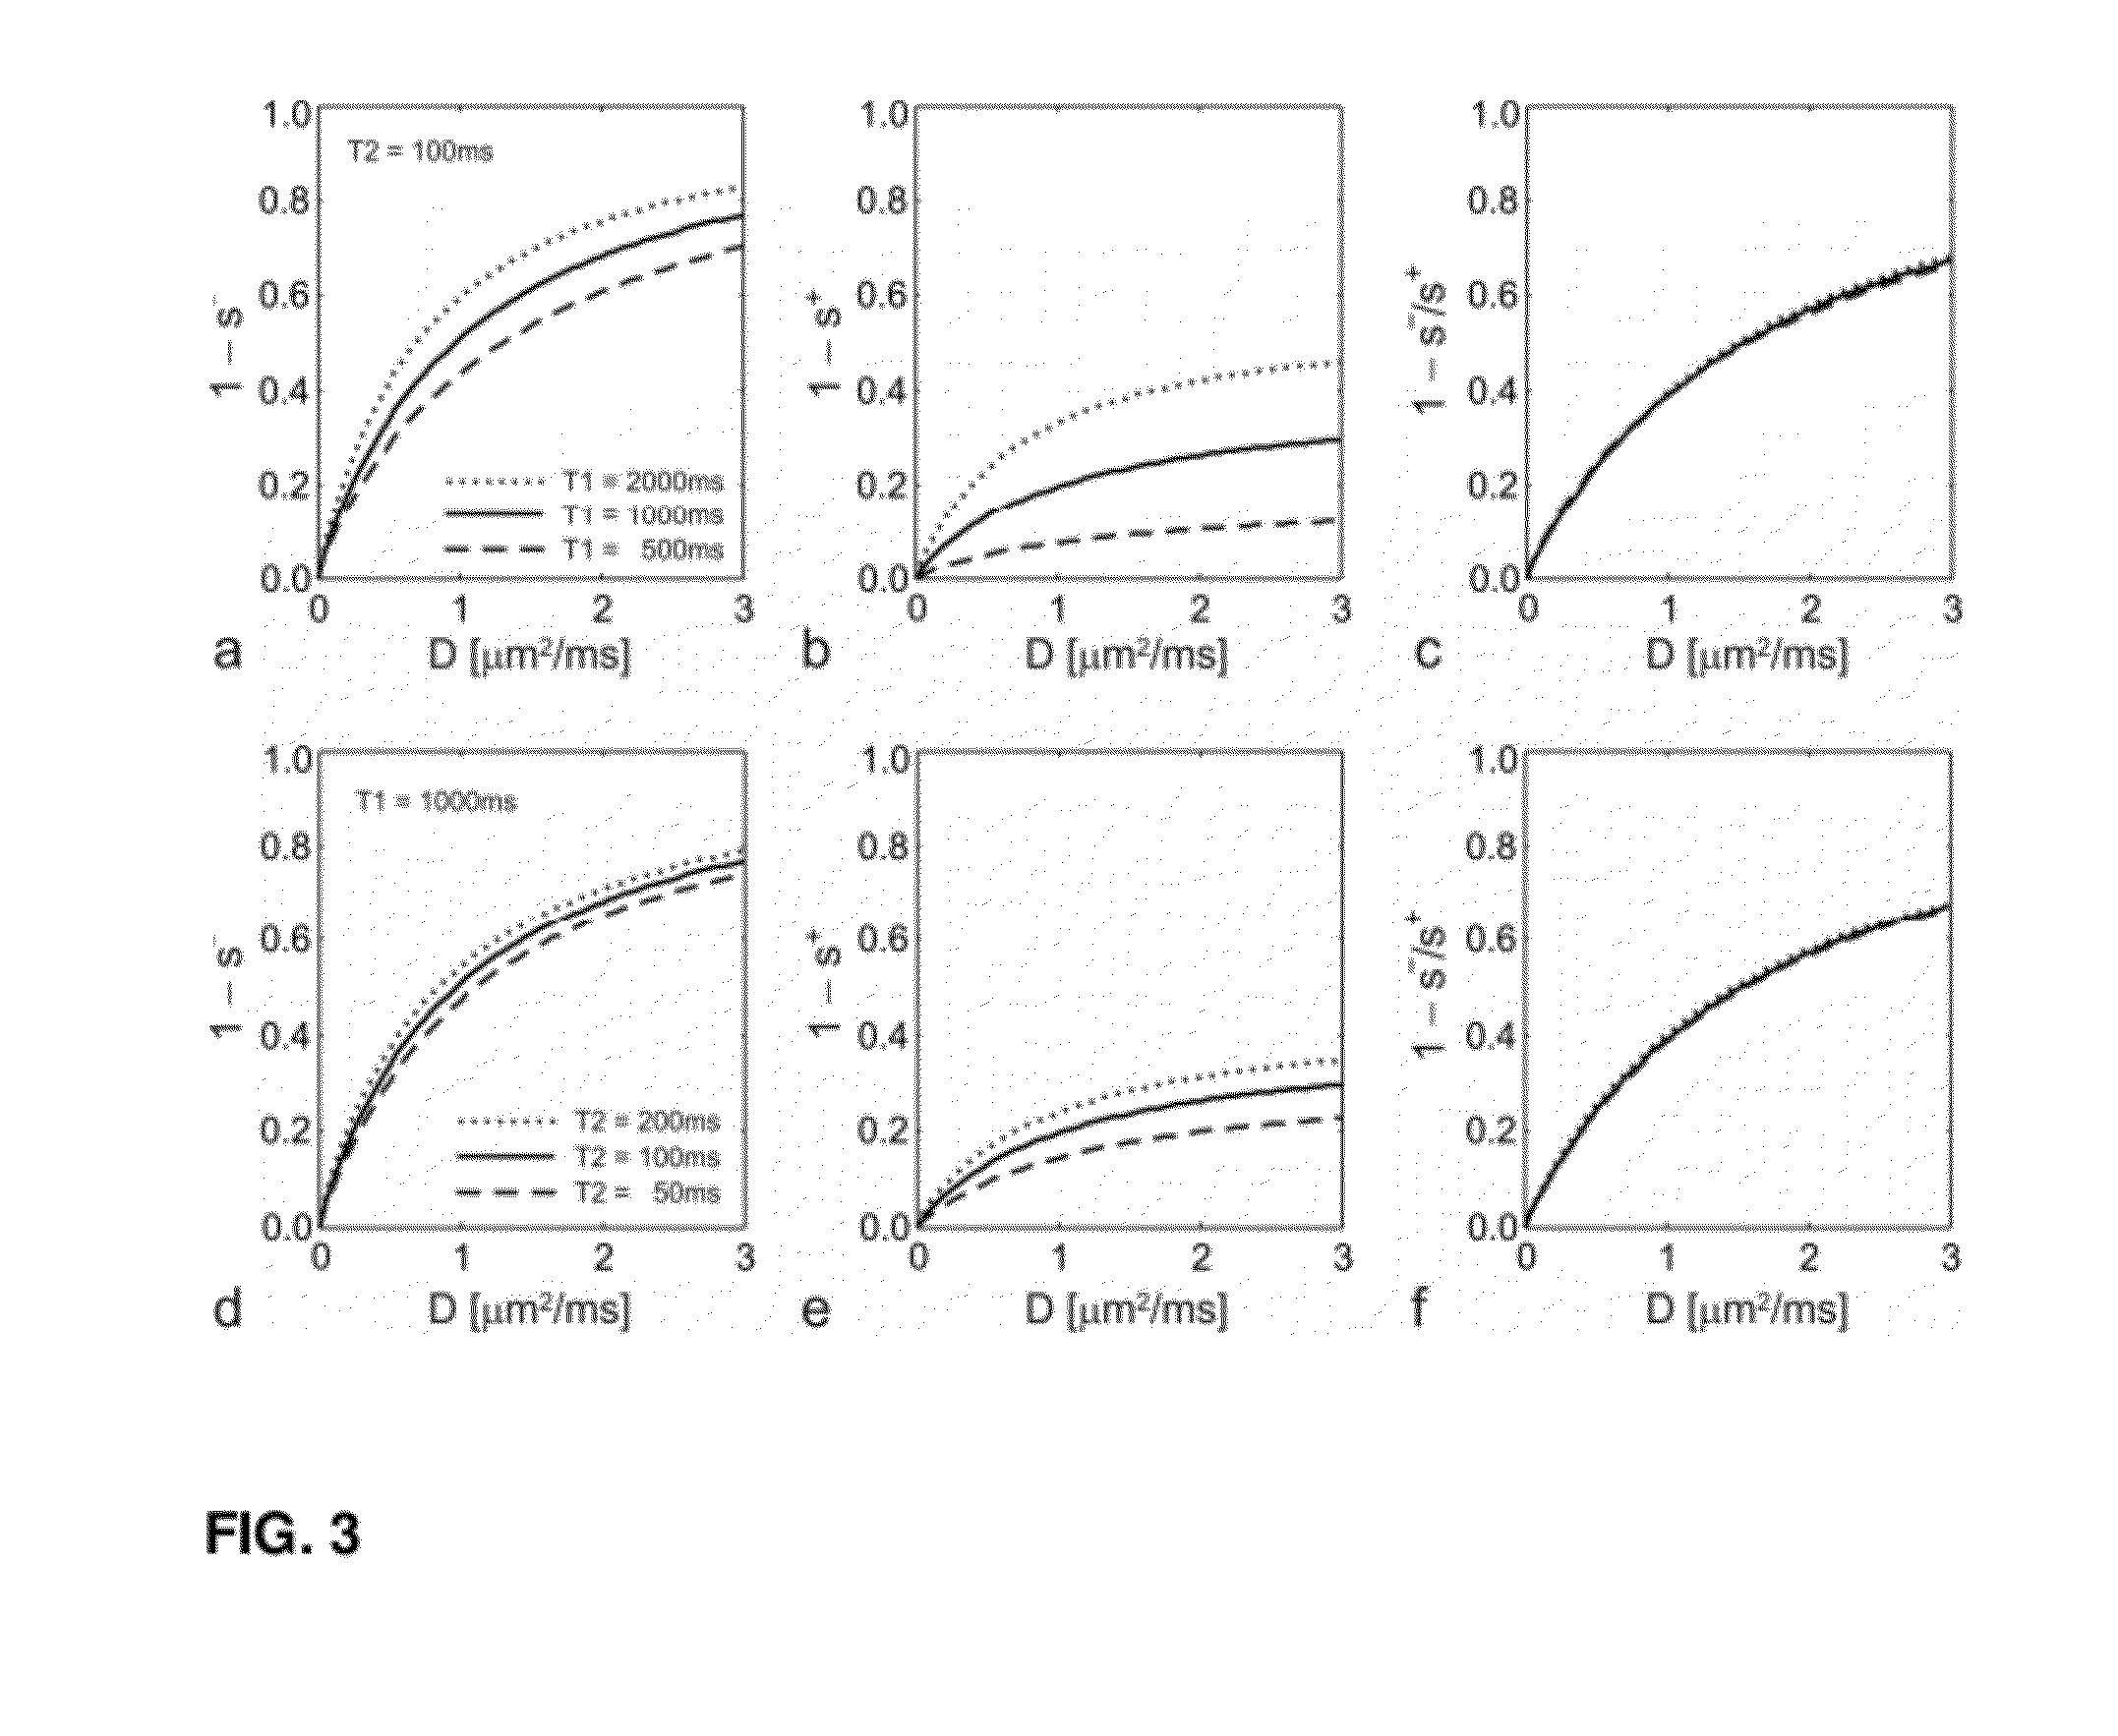 Magnetic resonance method for quantification of molecular diffusion using double echo steady state sequences